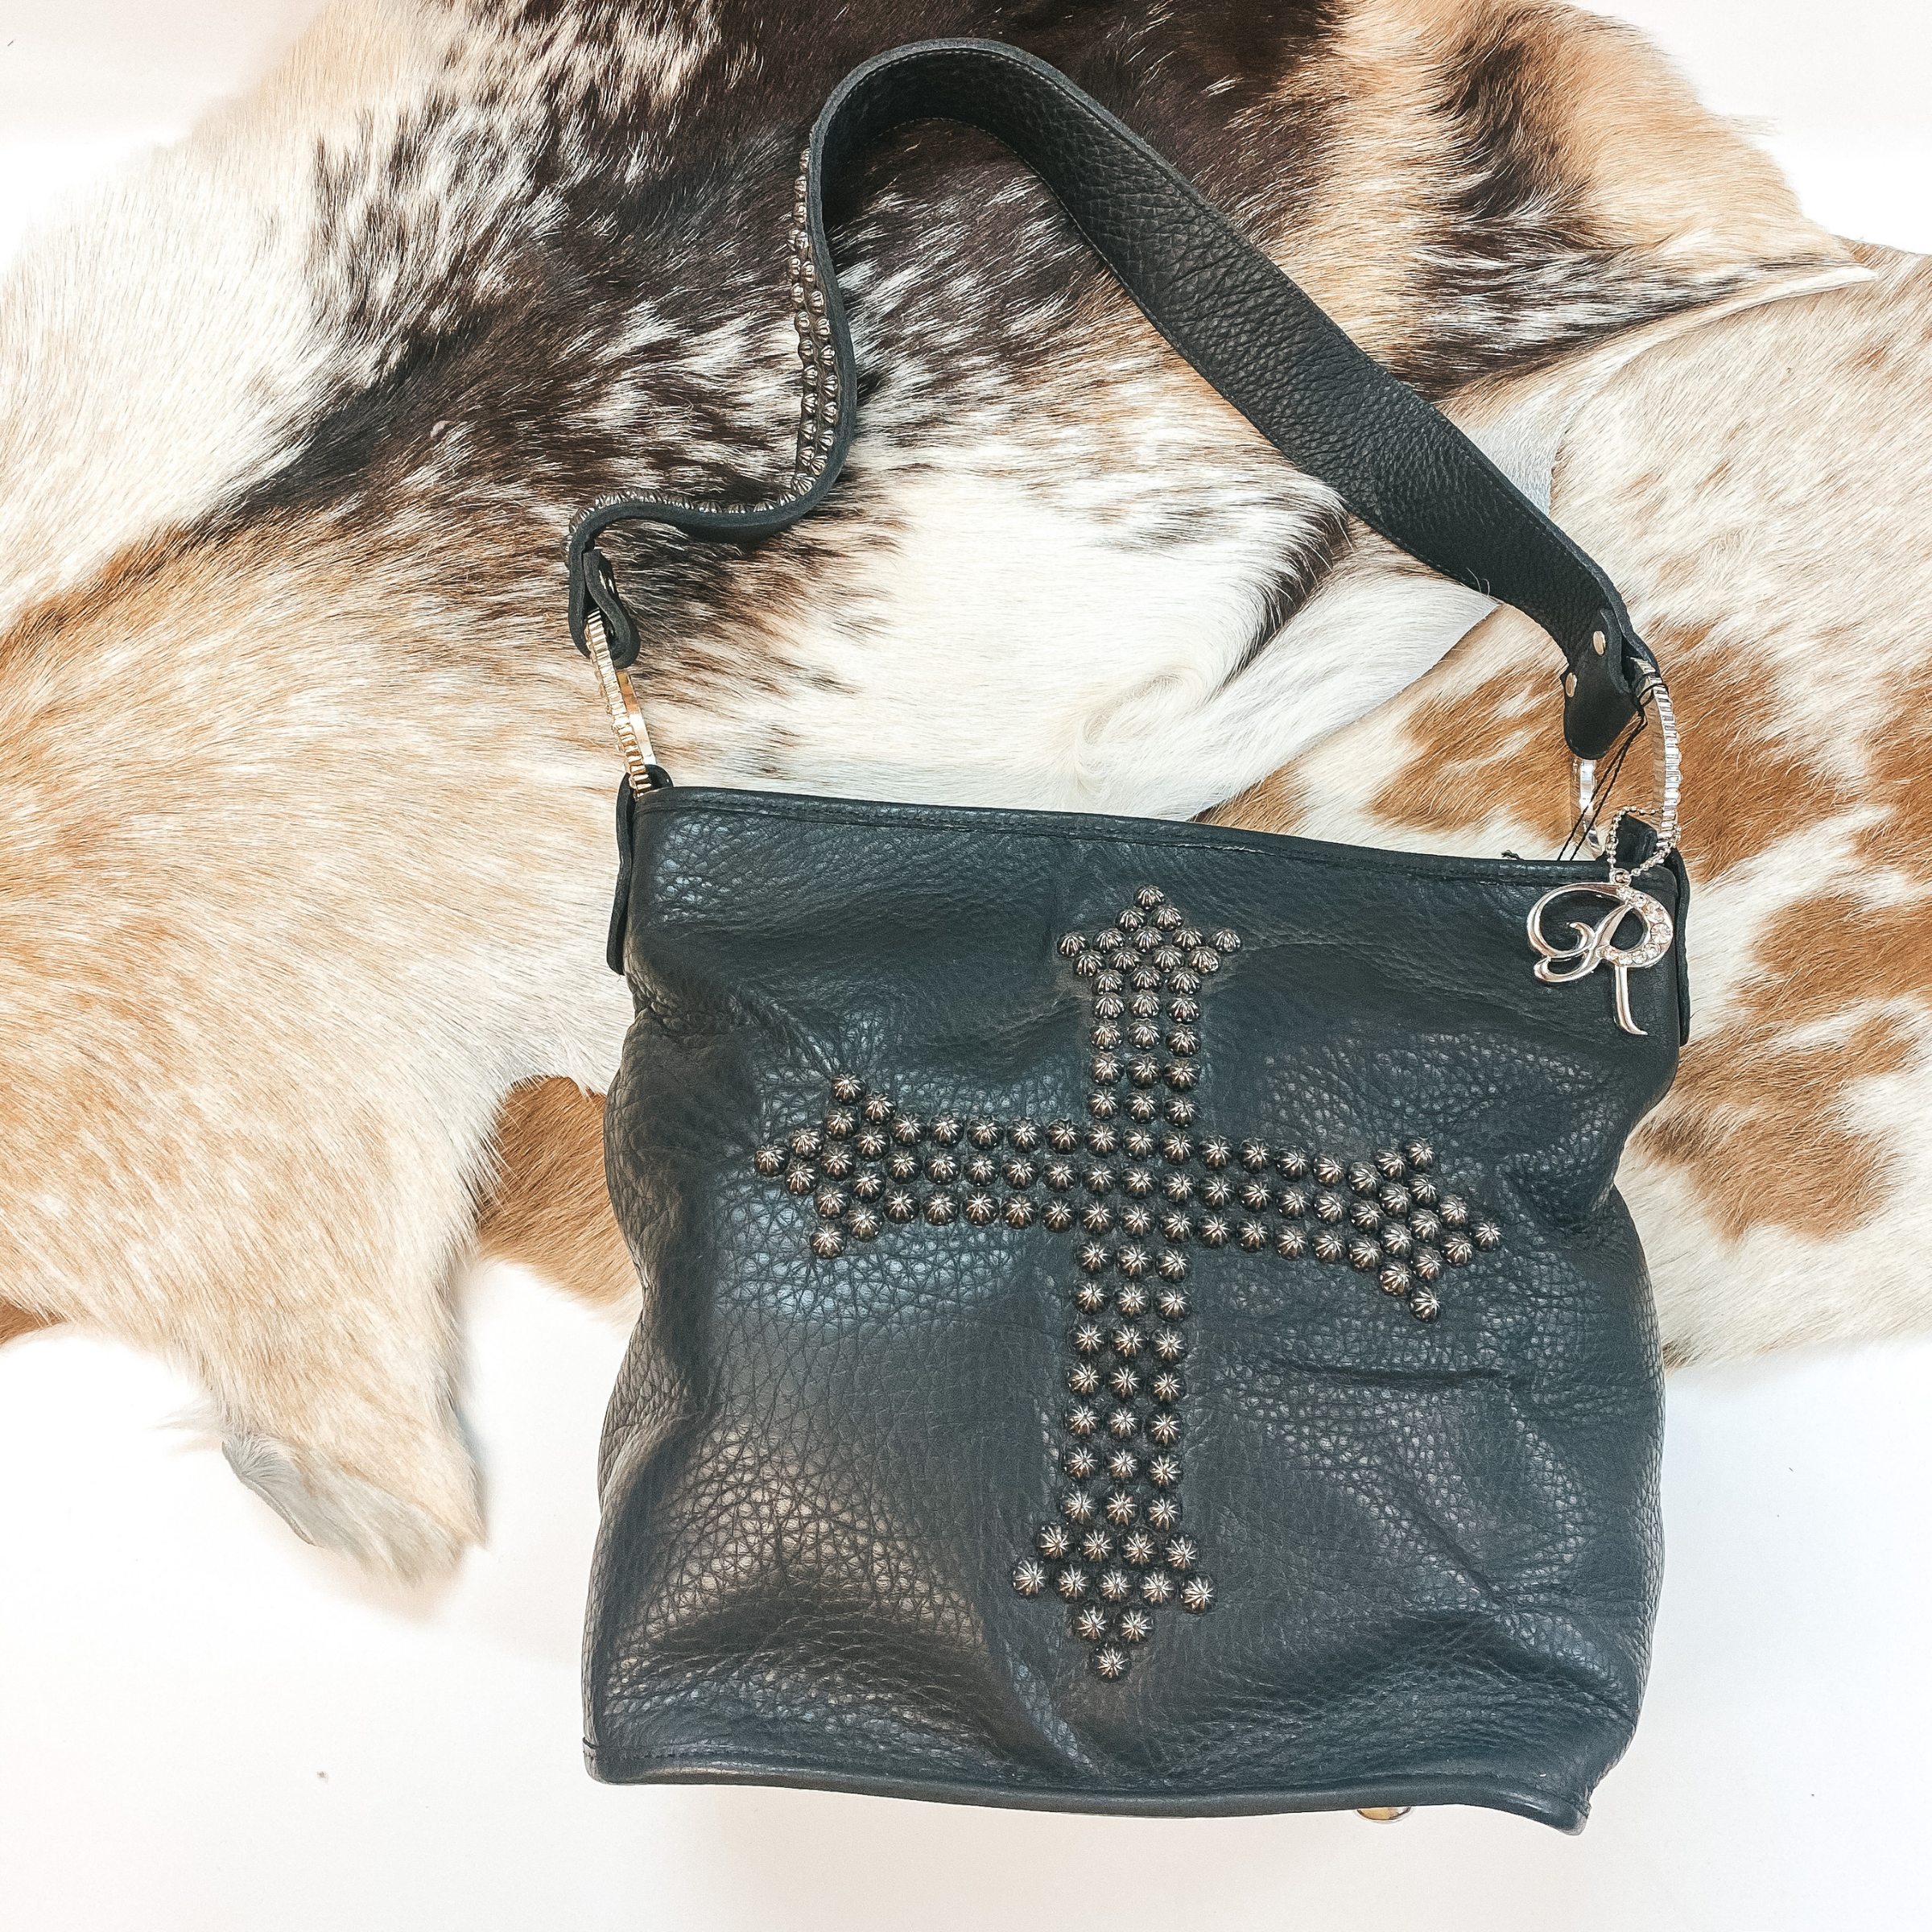 Raviani Genuine Italian Black Leather Purse - Giddy Up Glamour Boutique